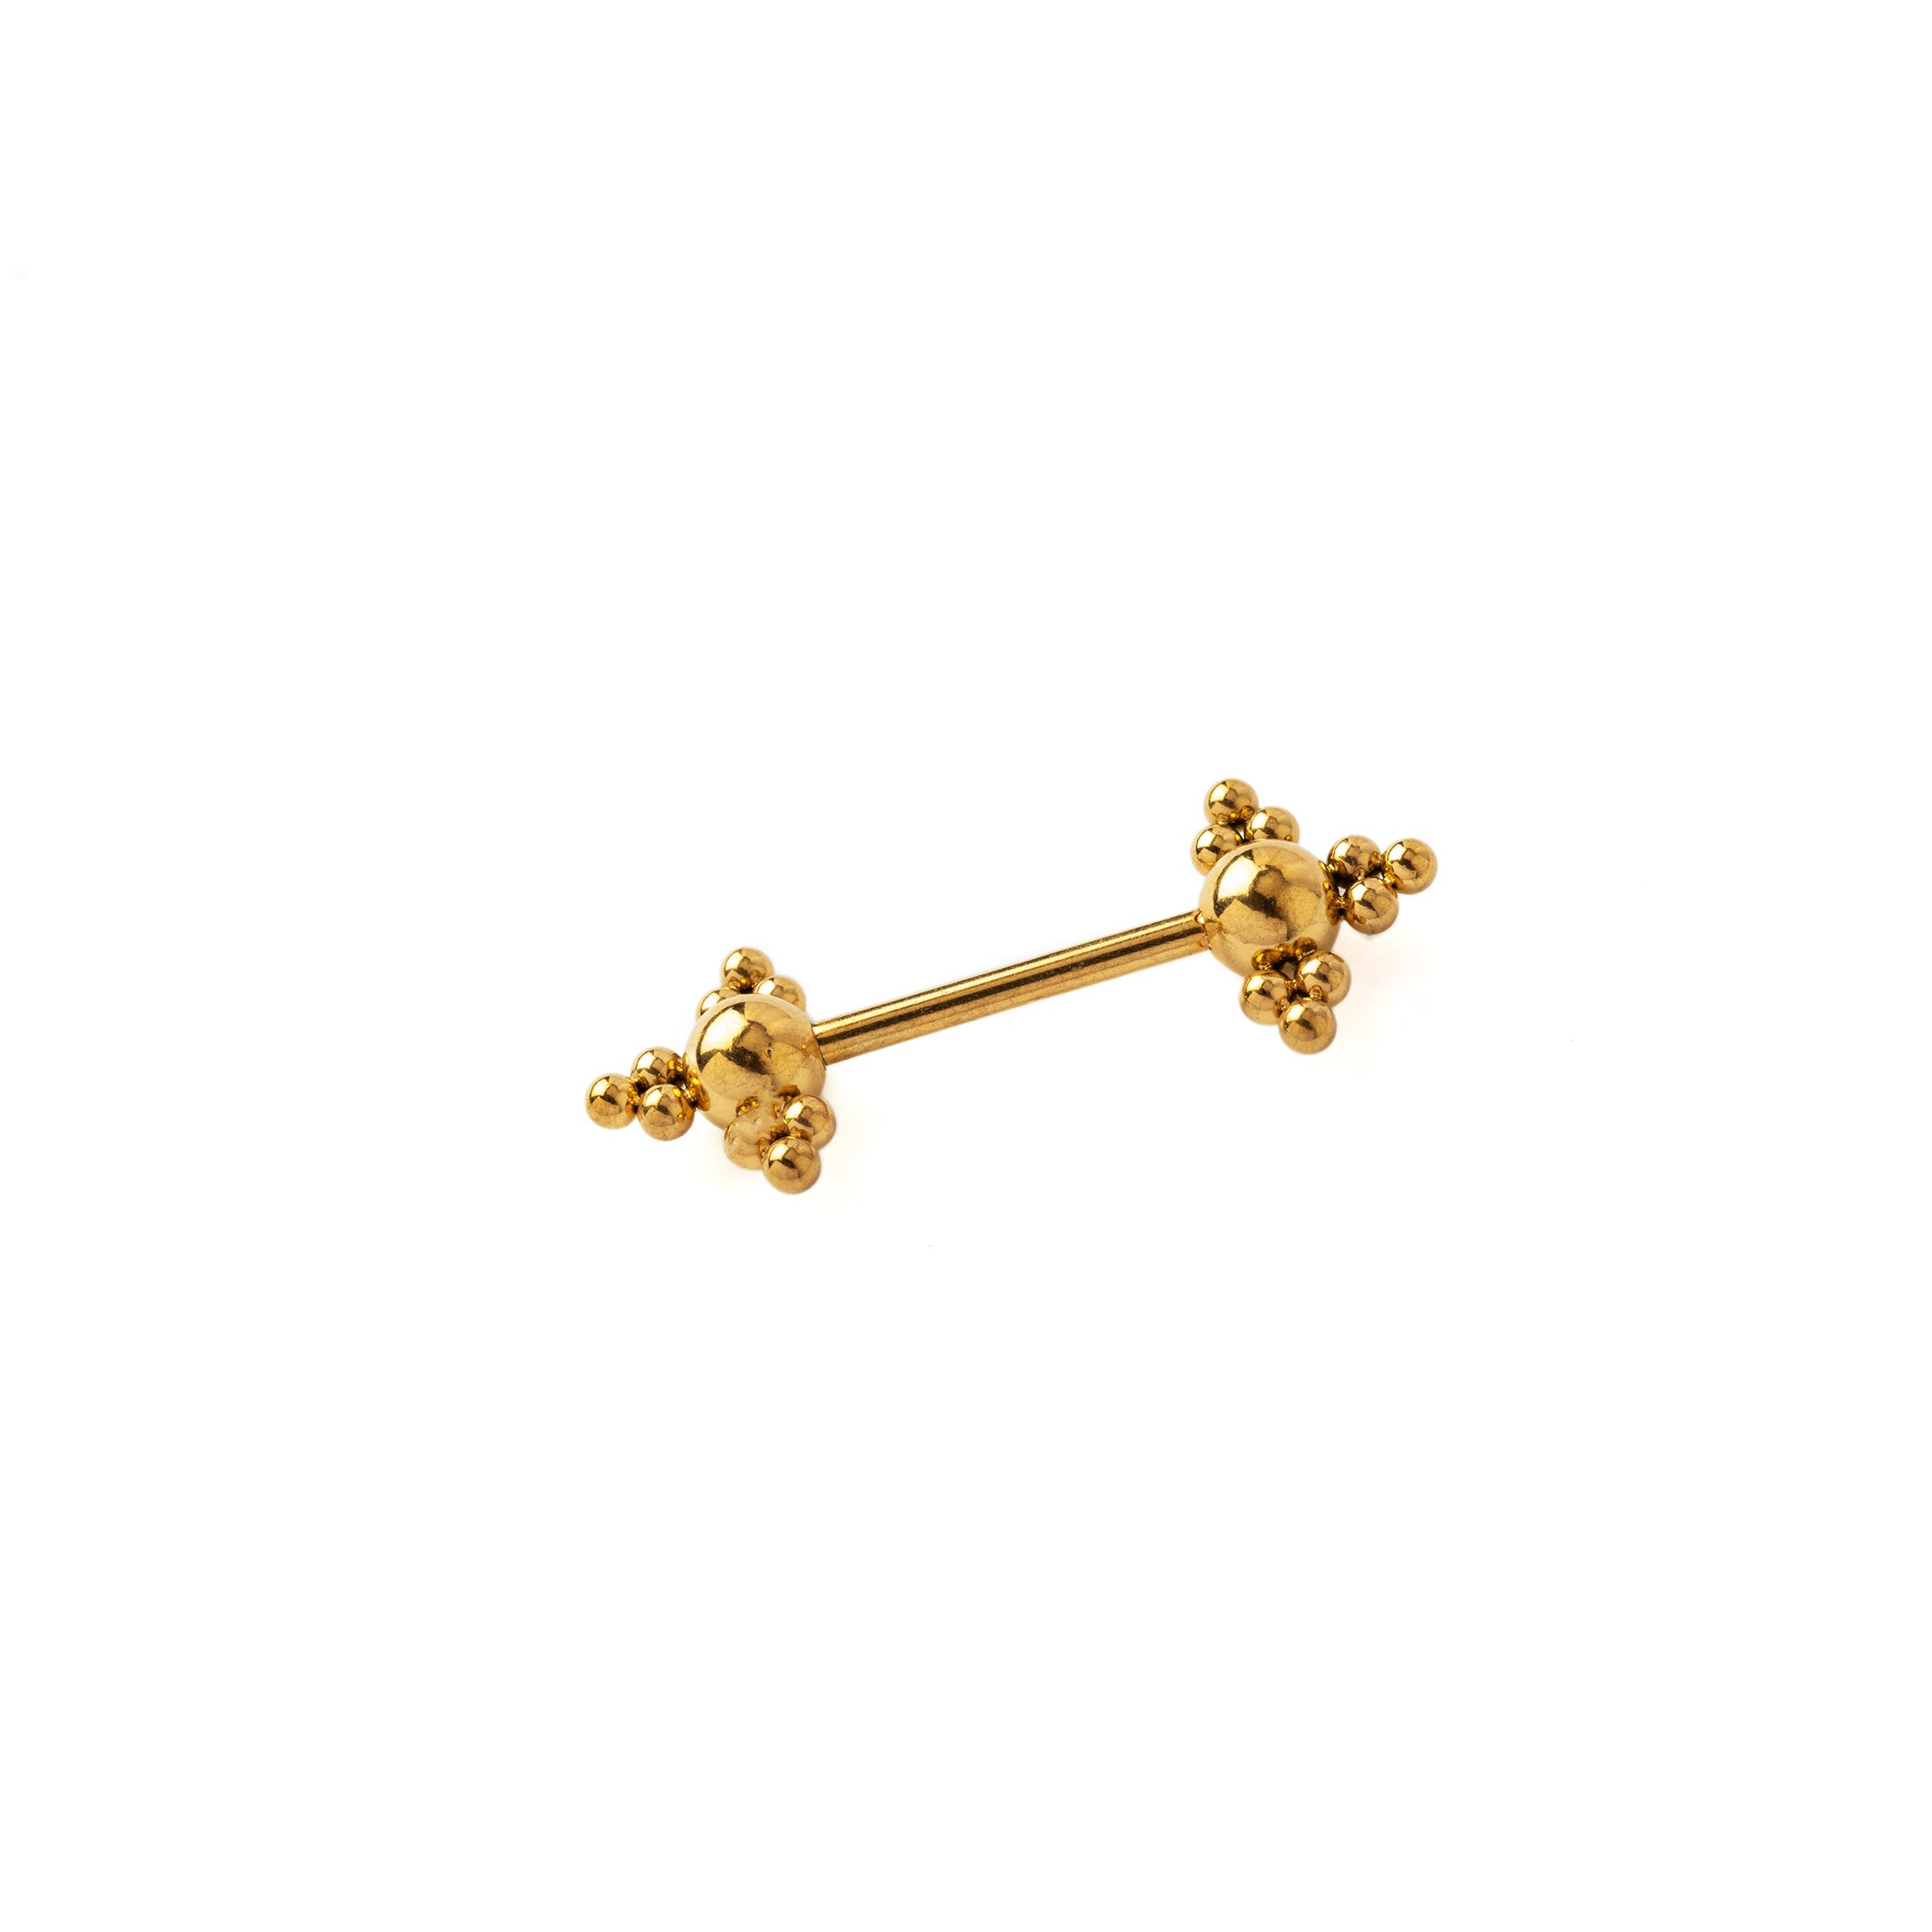 Zohar Golden Nipple Bar right side view